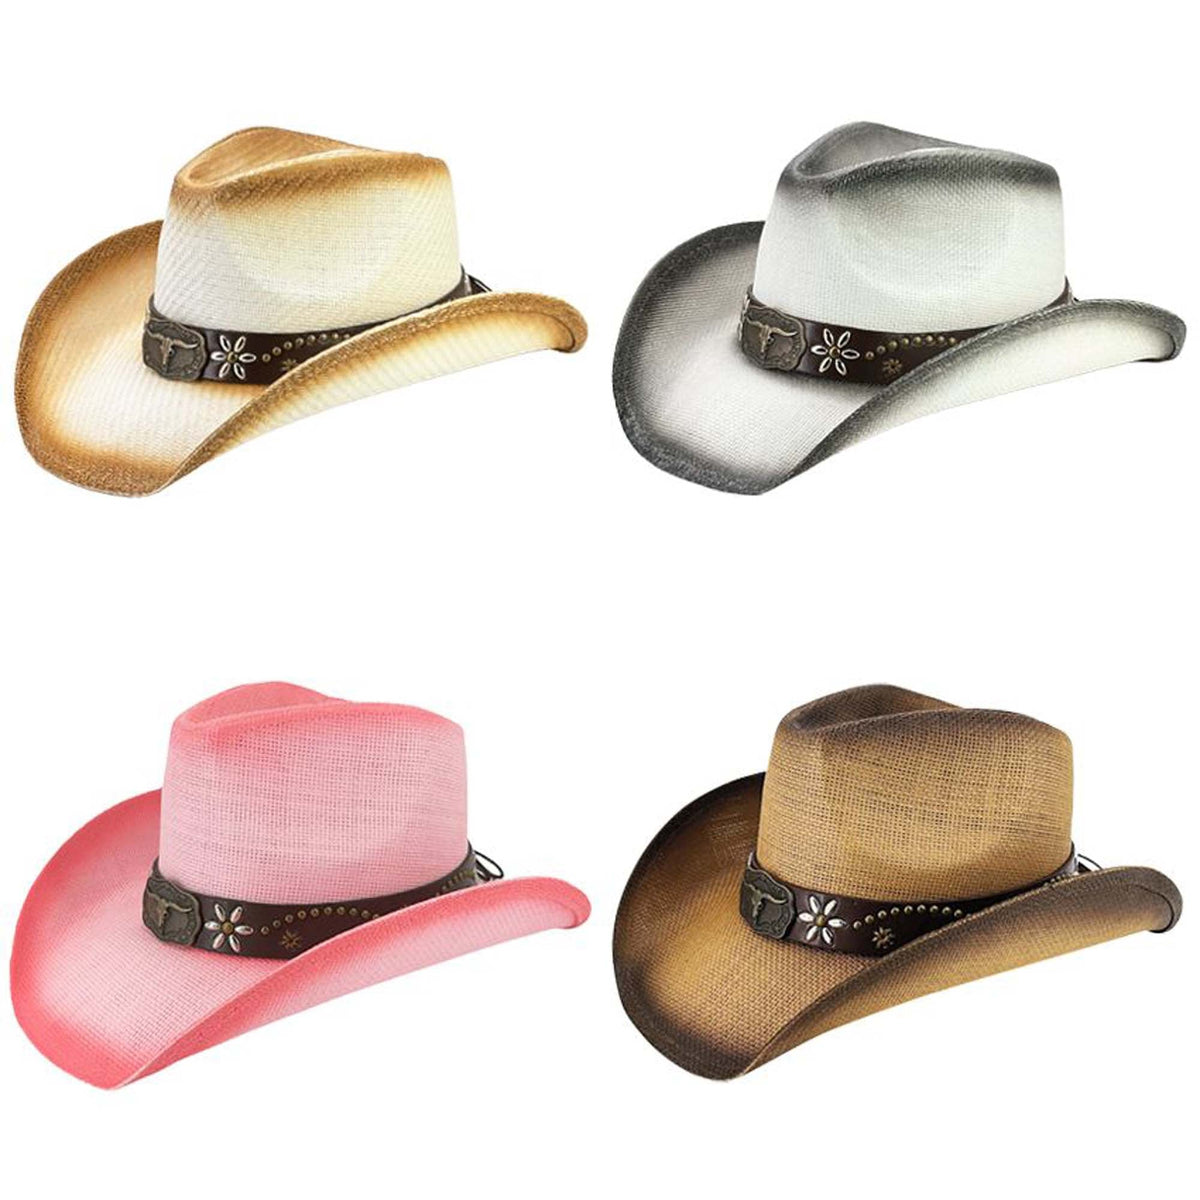 BUY4STORE Costume Accessories Western Cowboy Hat for Adults, Assortment, 1 Count B4S56378CA